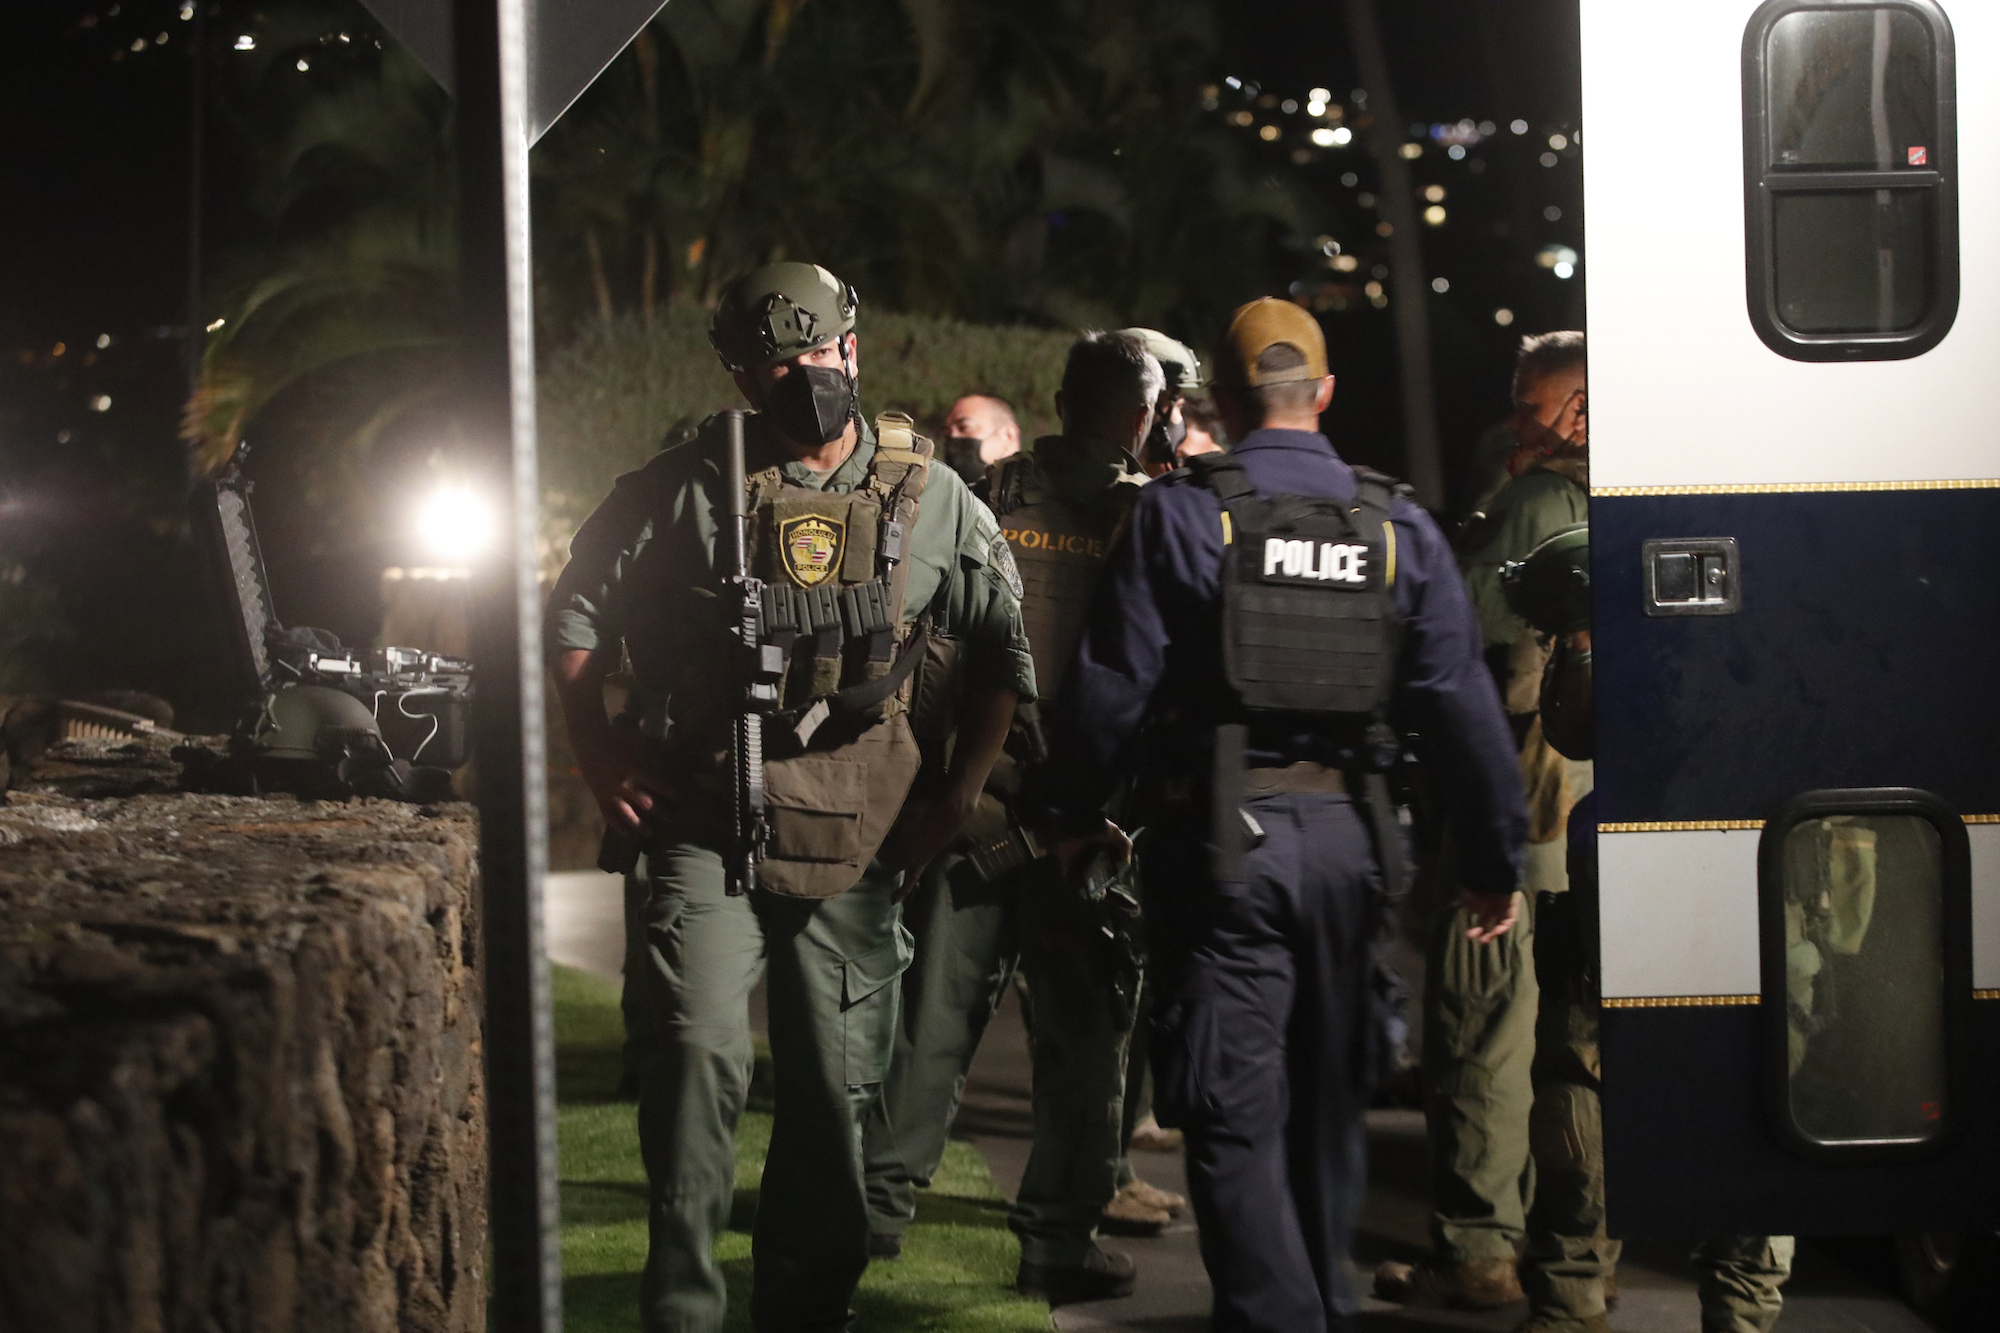 Members of the Honolulu Police Specialized Services Division respond to a barricade situation with an armed man at the Kahala Hotel in Honolulu on April 10, 2021. (Cindy Ellen Russell—Honolulu Star-Advertiser/AP)